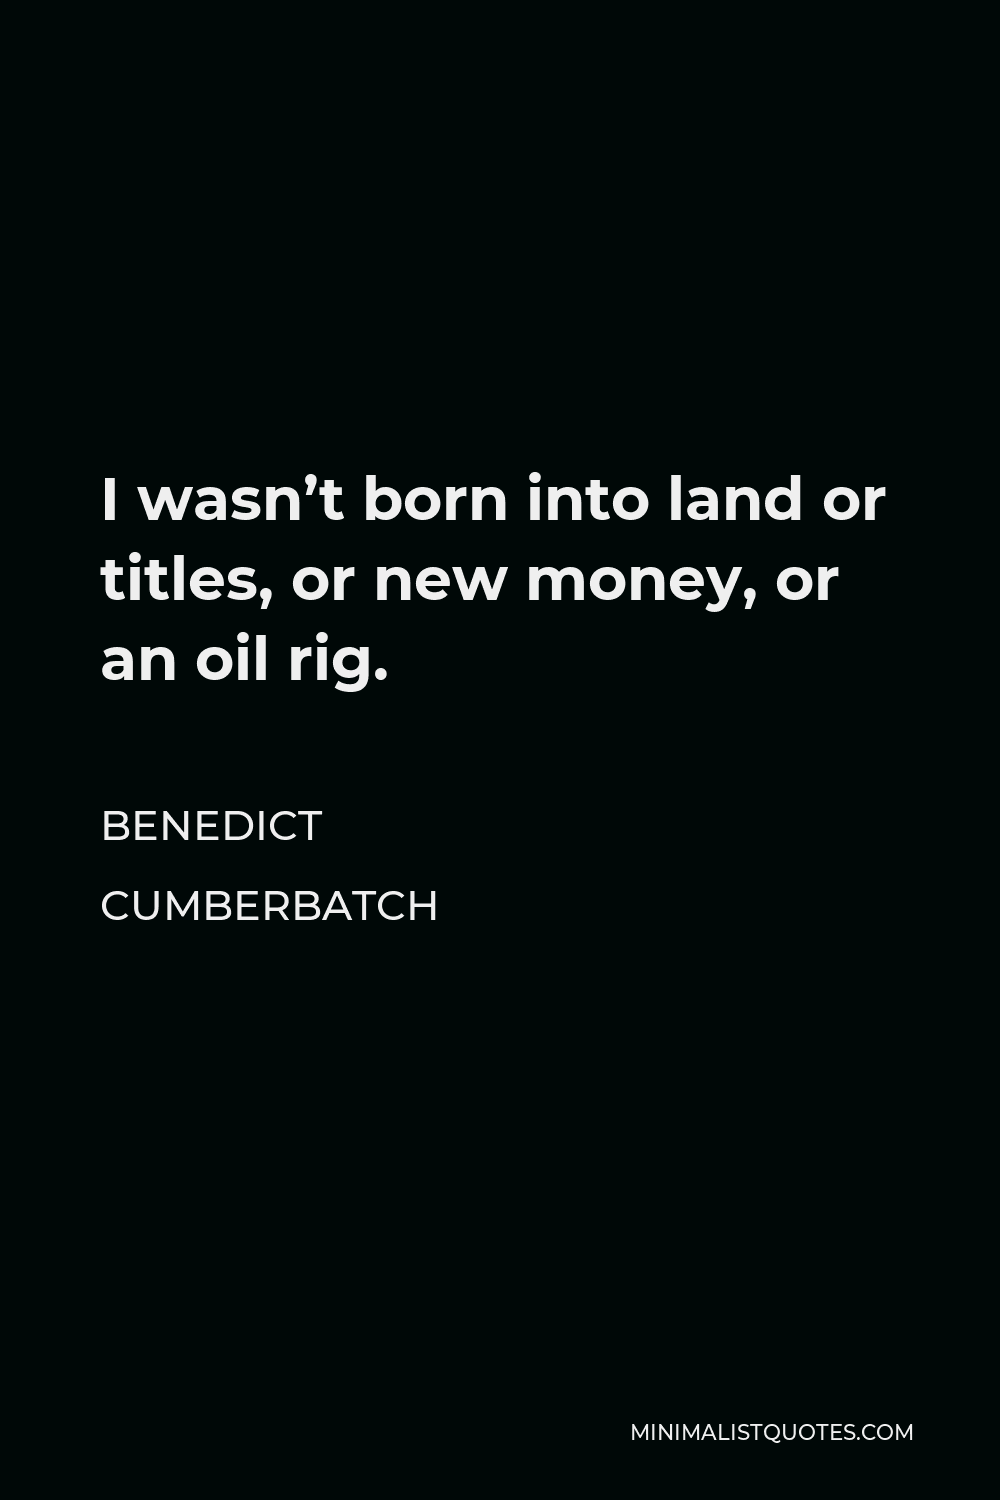 Benedict Cumberbatch Quote - I wasn’t born into land or titles, or new money, or an oil rig.